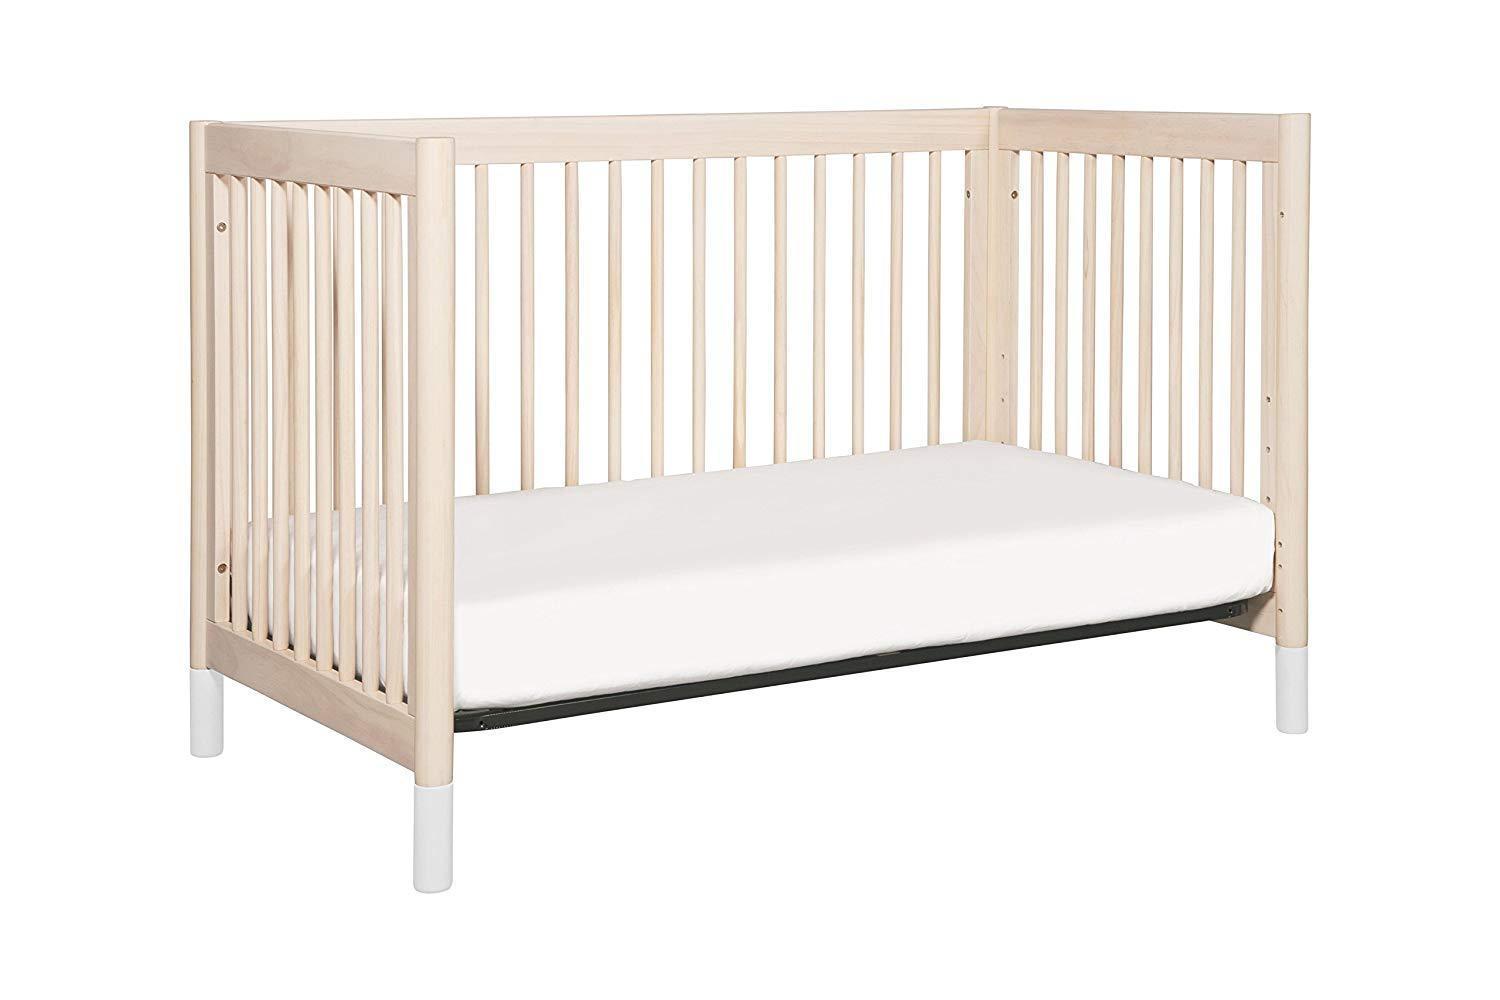 Babyletto Gelato 4-in-1 Convertible Crib with Toddler Bed Conversion Kit Call to order